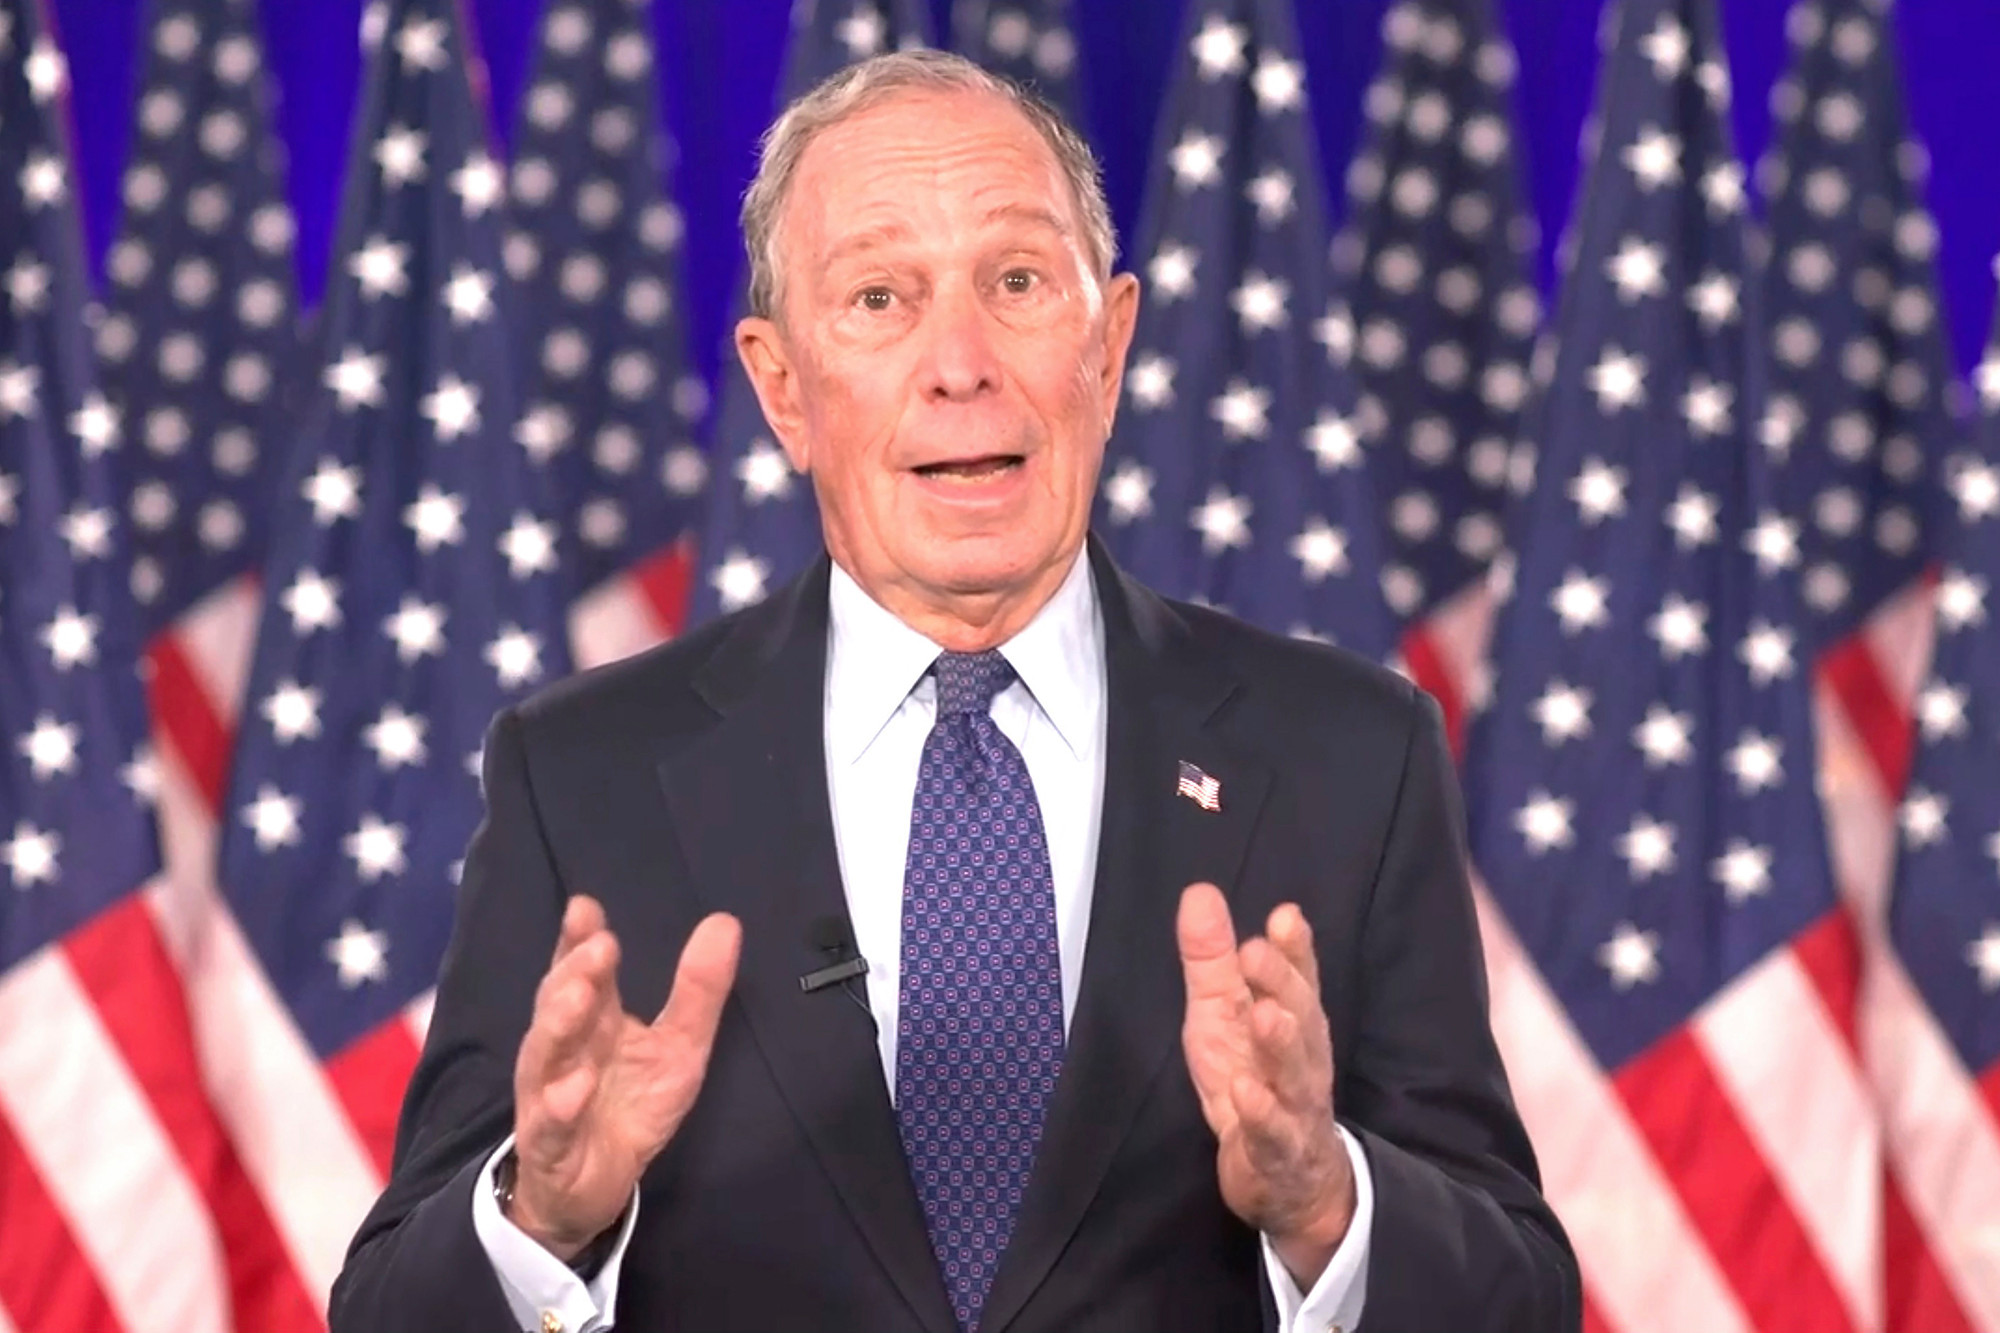 Michael Bloomberg tells America to 'fire' Trump in convention speech